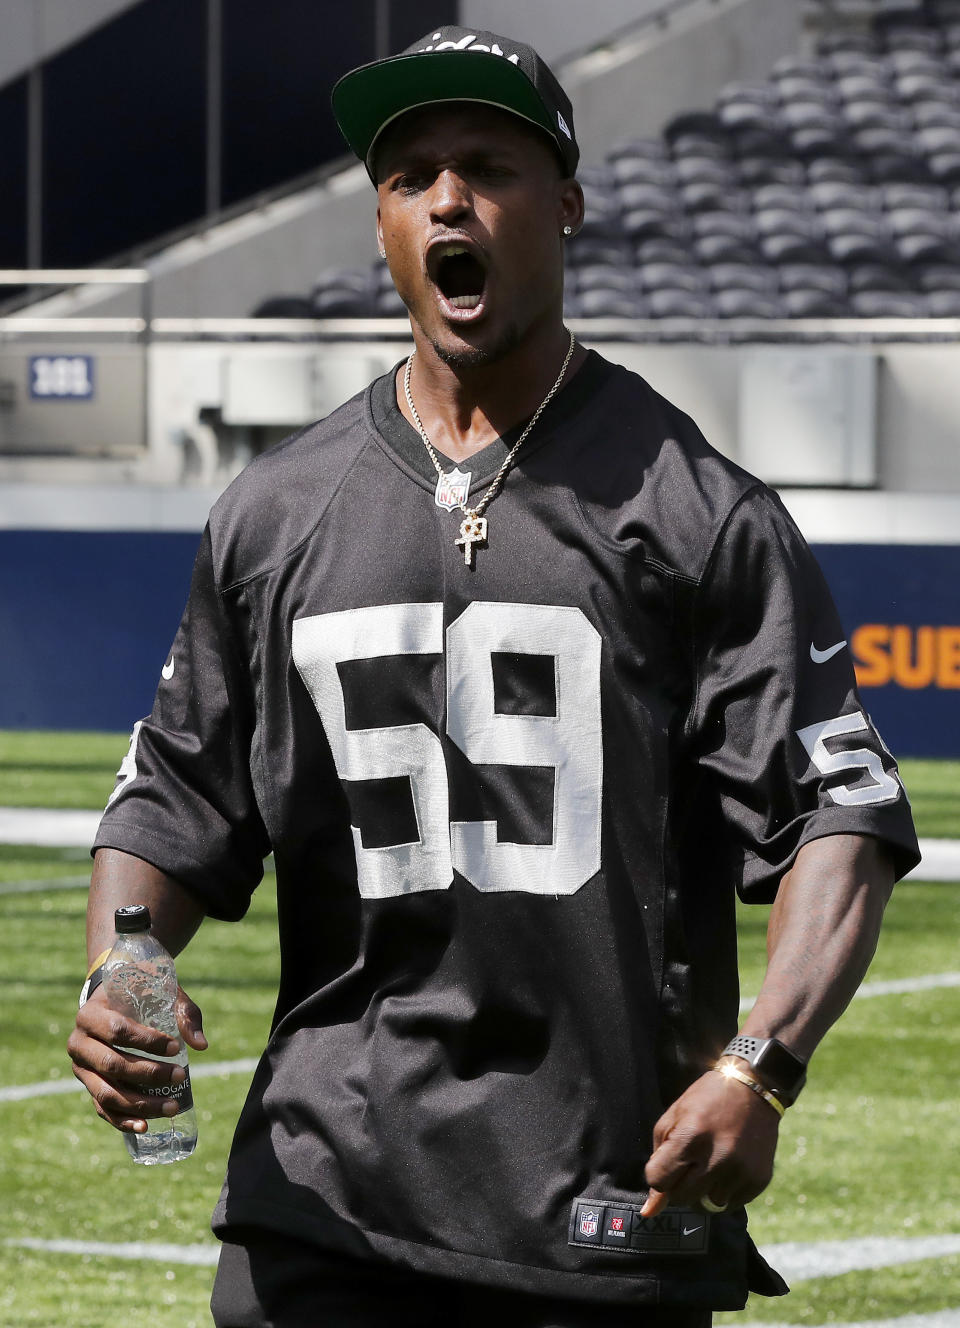 NFL player Tahir Whitehead reacts as he coaches a young team during the final tournament for the UK's NFL Flag Championship, featuring qualifying teams from around the country, at the Tottenham Hotspur Stadium in London, Wednesday, July 3, 2019. The new stadium will host its first two NFL London Games later this year when the Chicago Bears face the Oakland Raiders and the Carolina Panthers take on the Tampa Bay Buccaneers. (AP Photo/Frank Augstein)